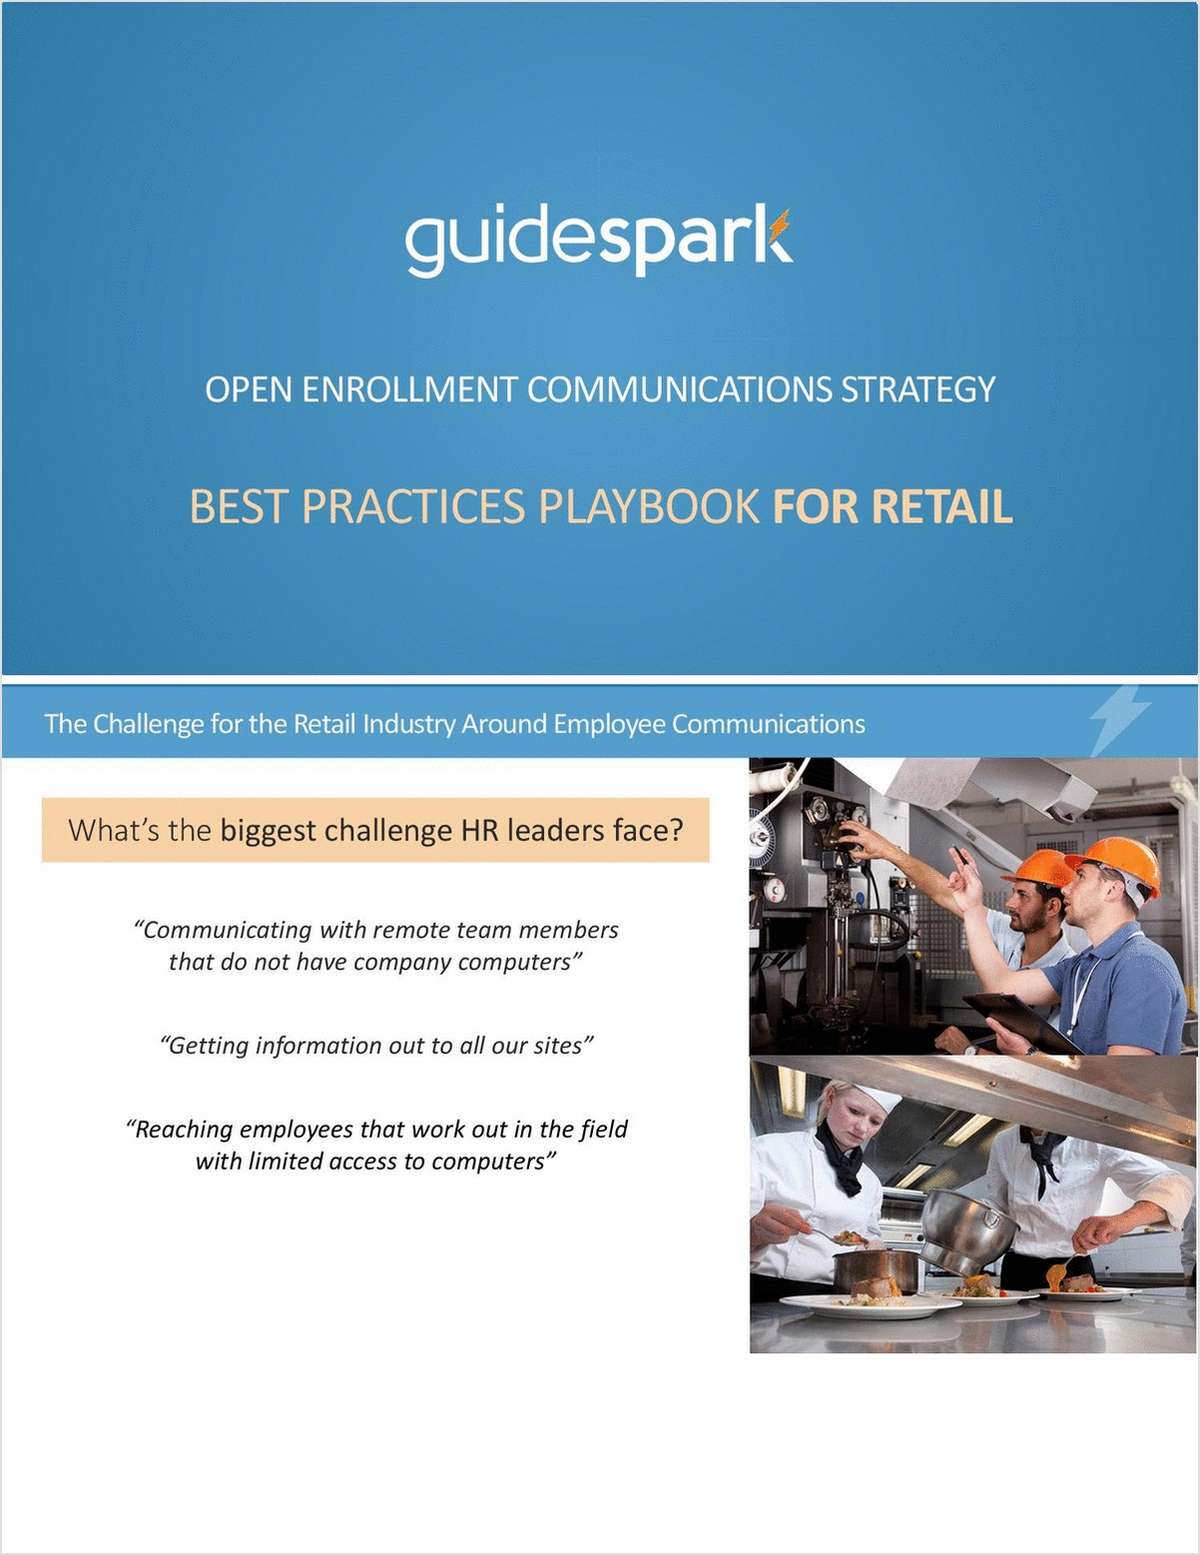 Retail Best Practices Playbook for Open Enrollment Communication